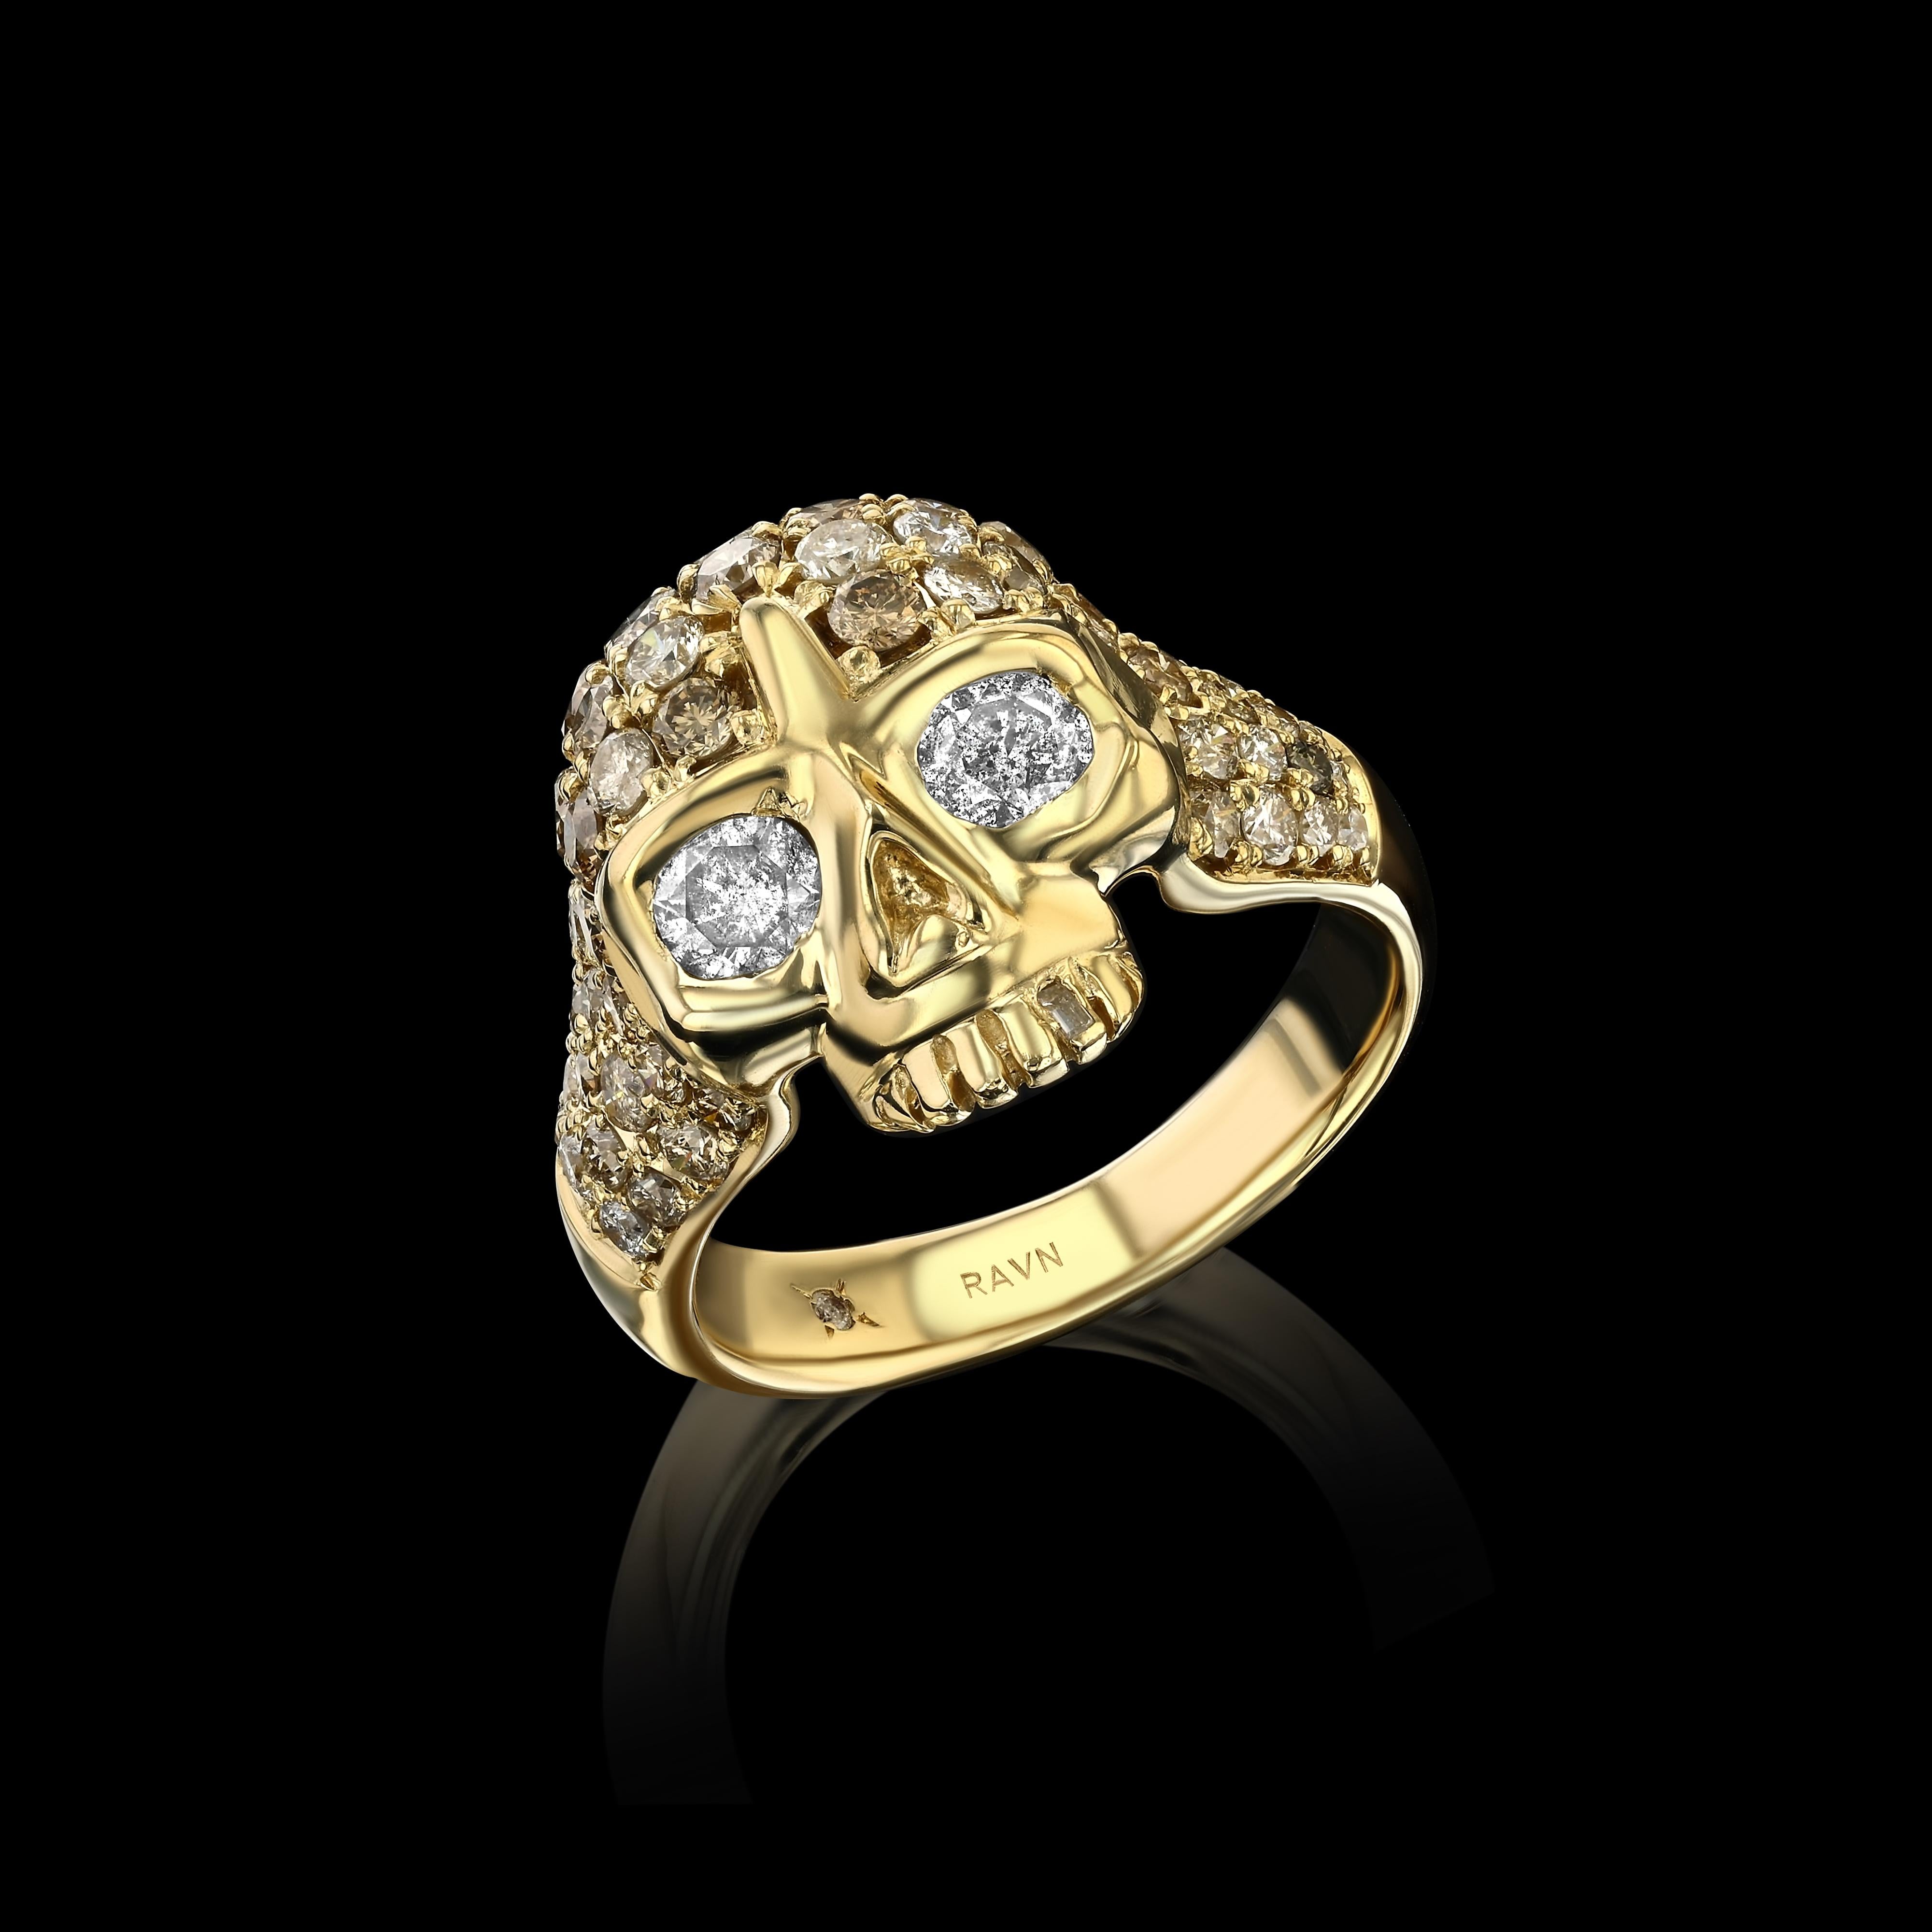 18k yellow gold, hand carved, skull ring, with diamond eyes, baguette diamond tooth and encrusted with 73 champagne diamonds (2.4ct). 